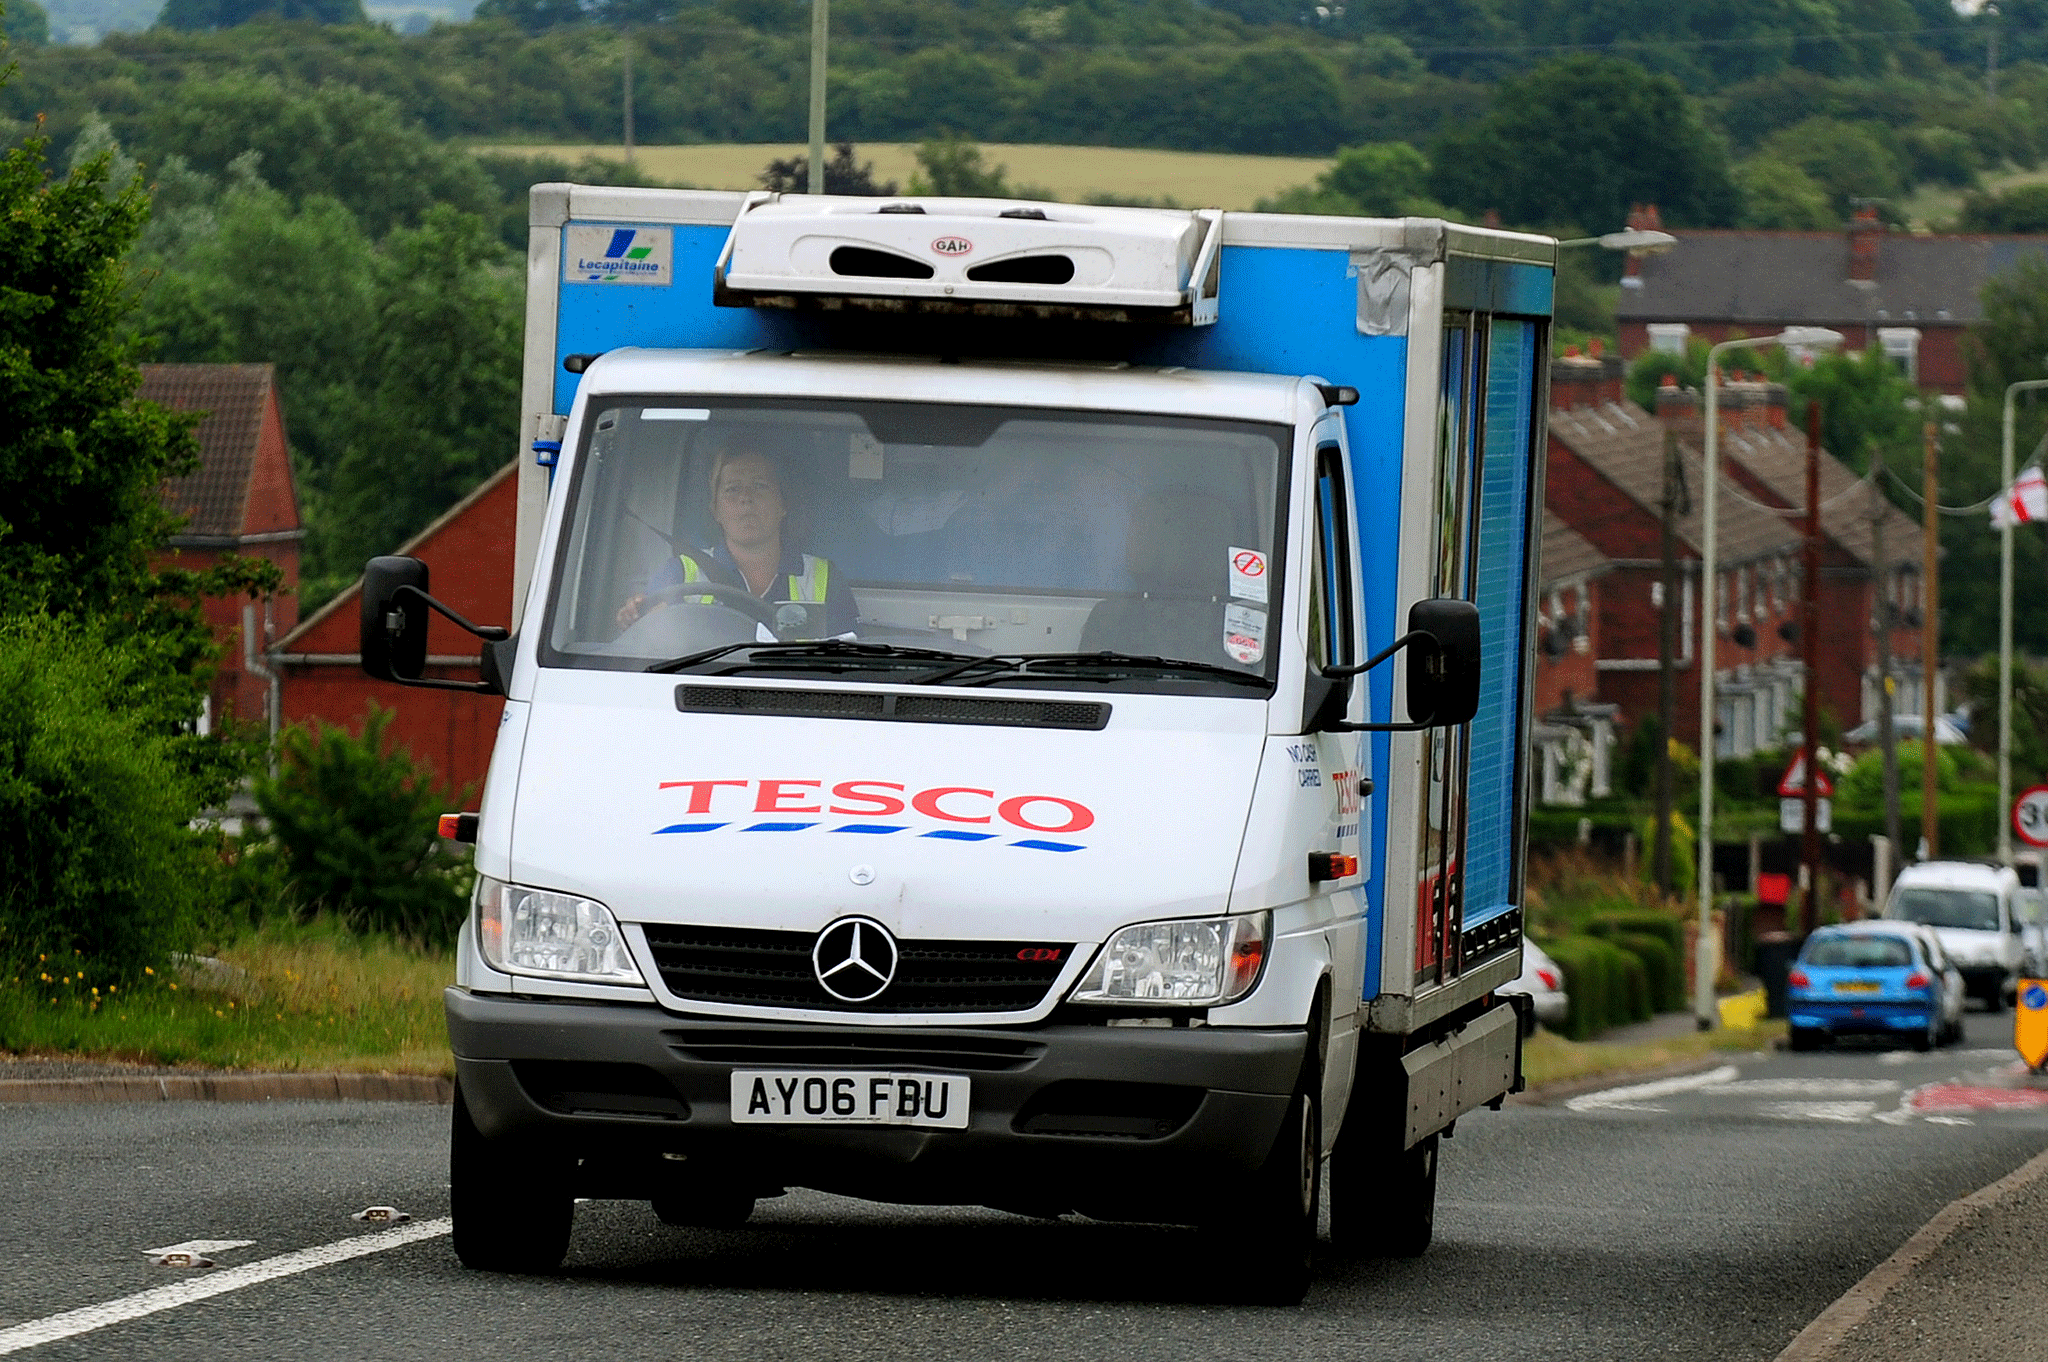 Tesco has also recently extended its same-day click and collect service to 300 UK locations